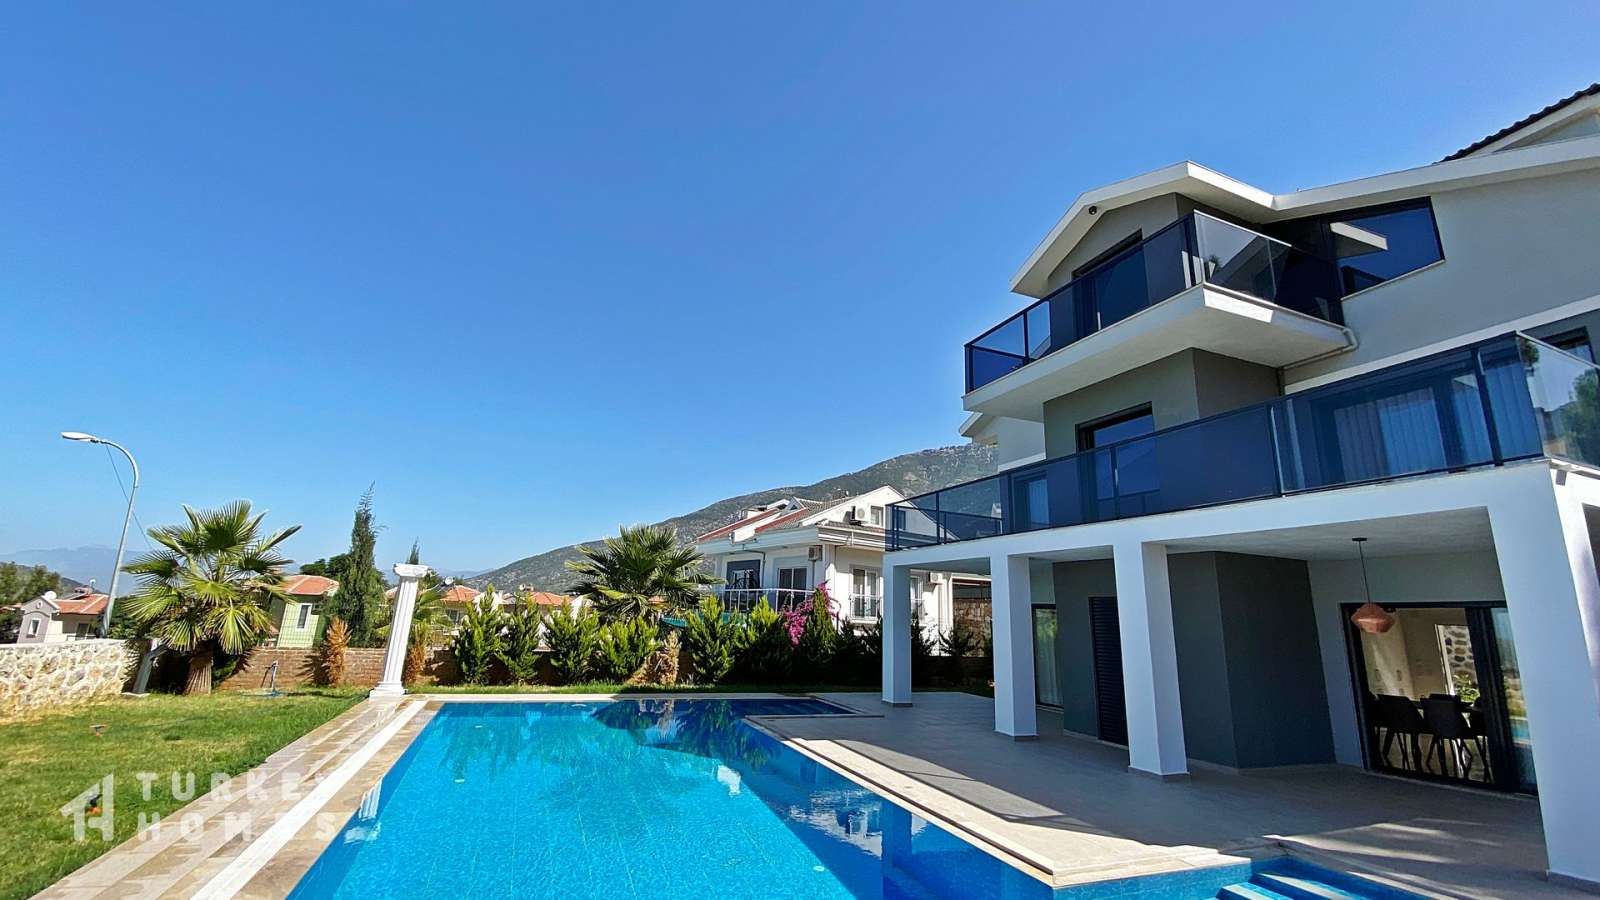 Detached 4-Bed Villa in Ovacık- Large Private Pool